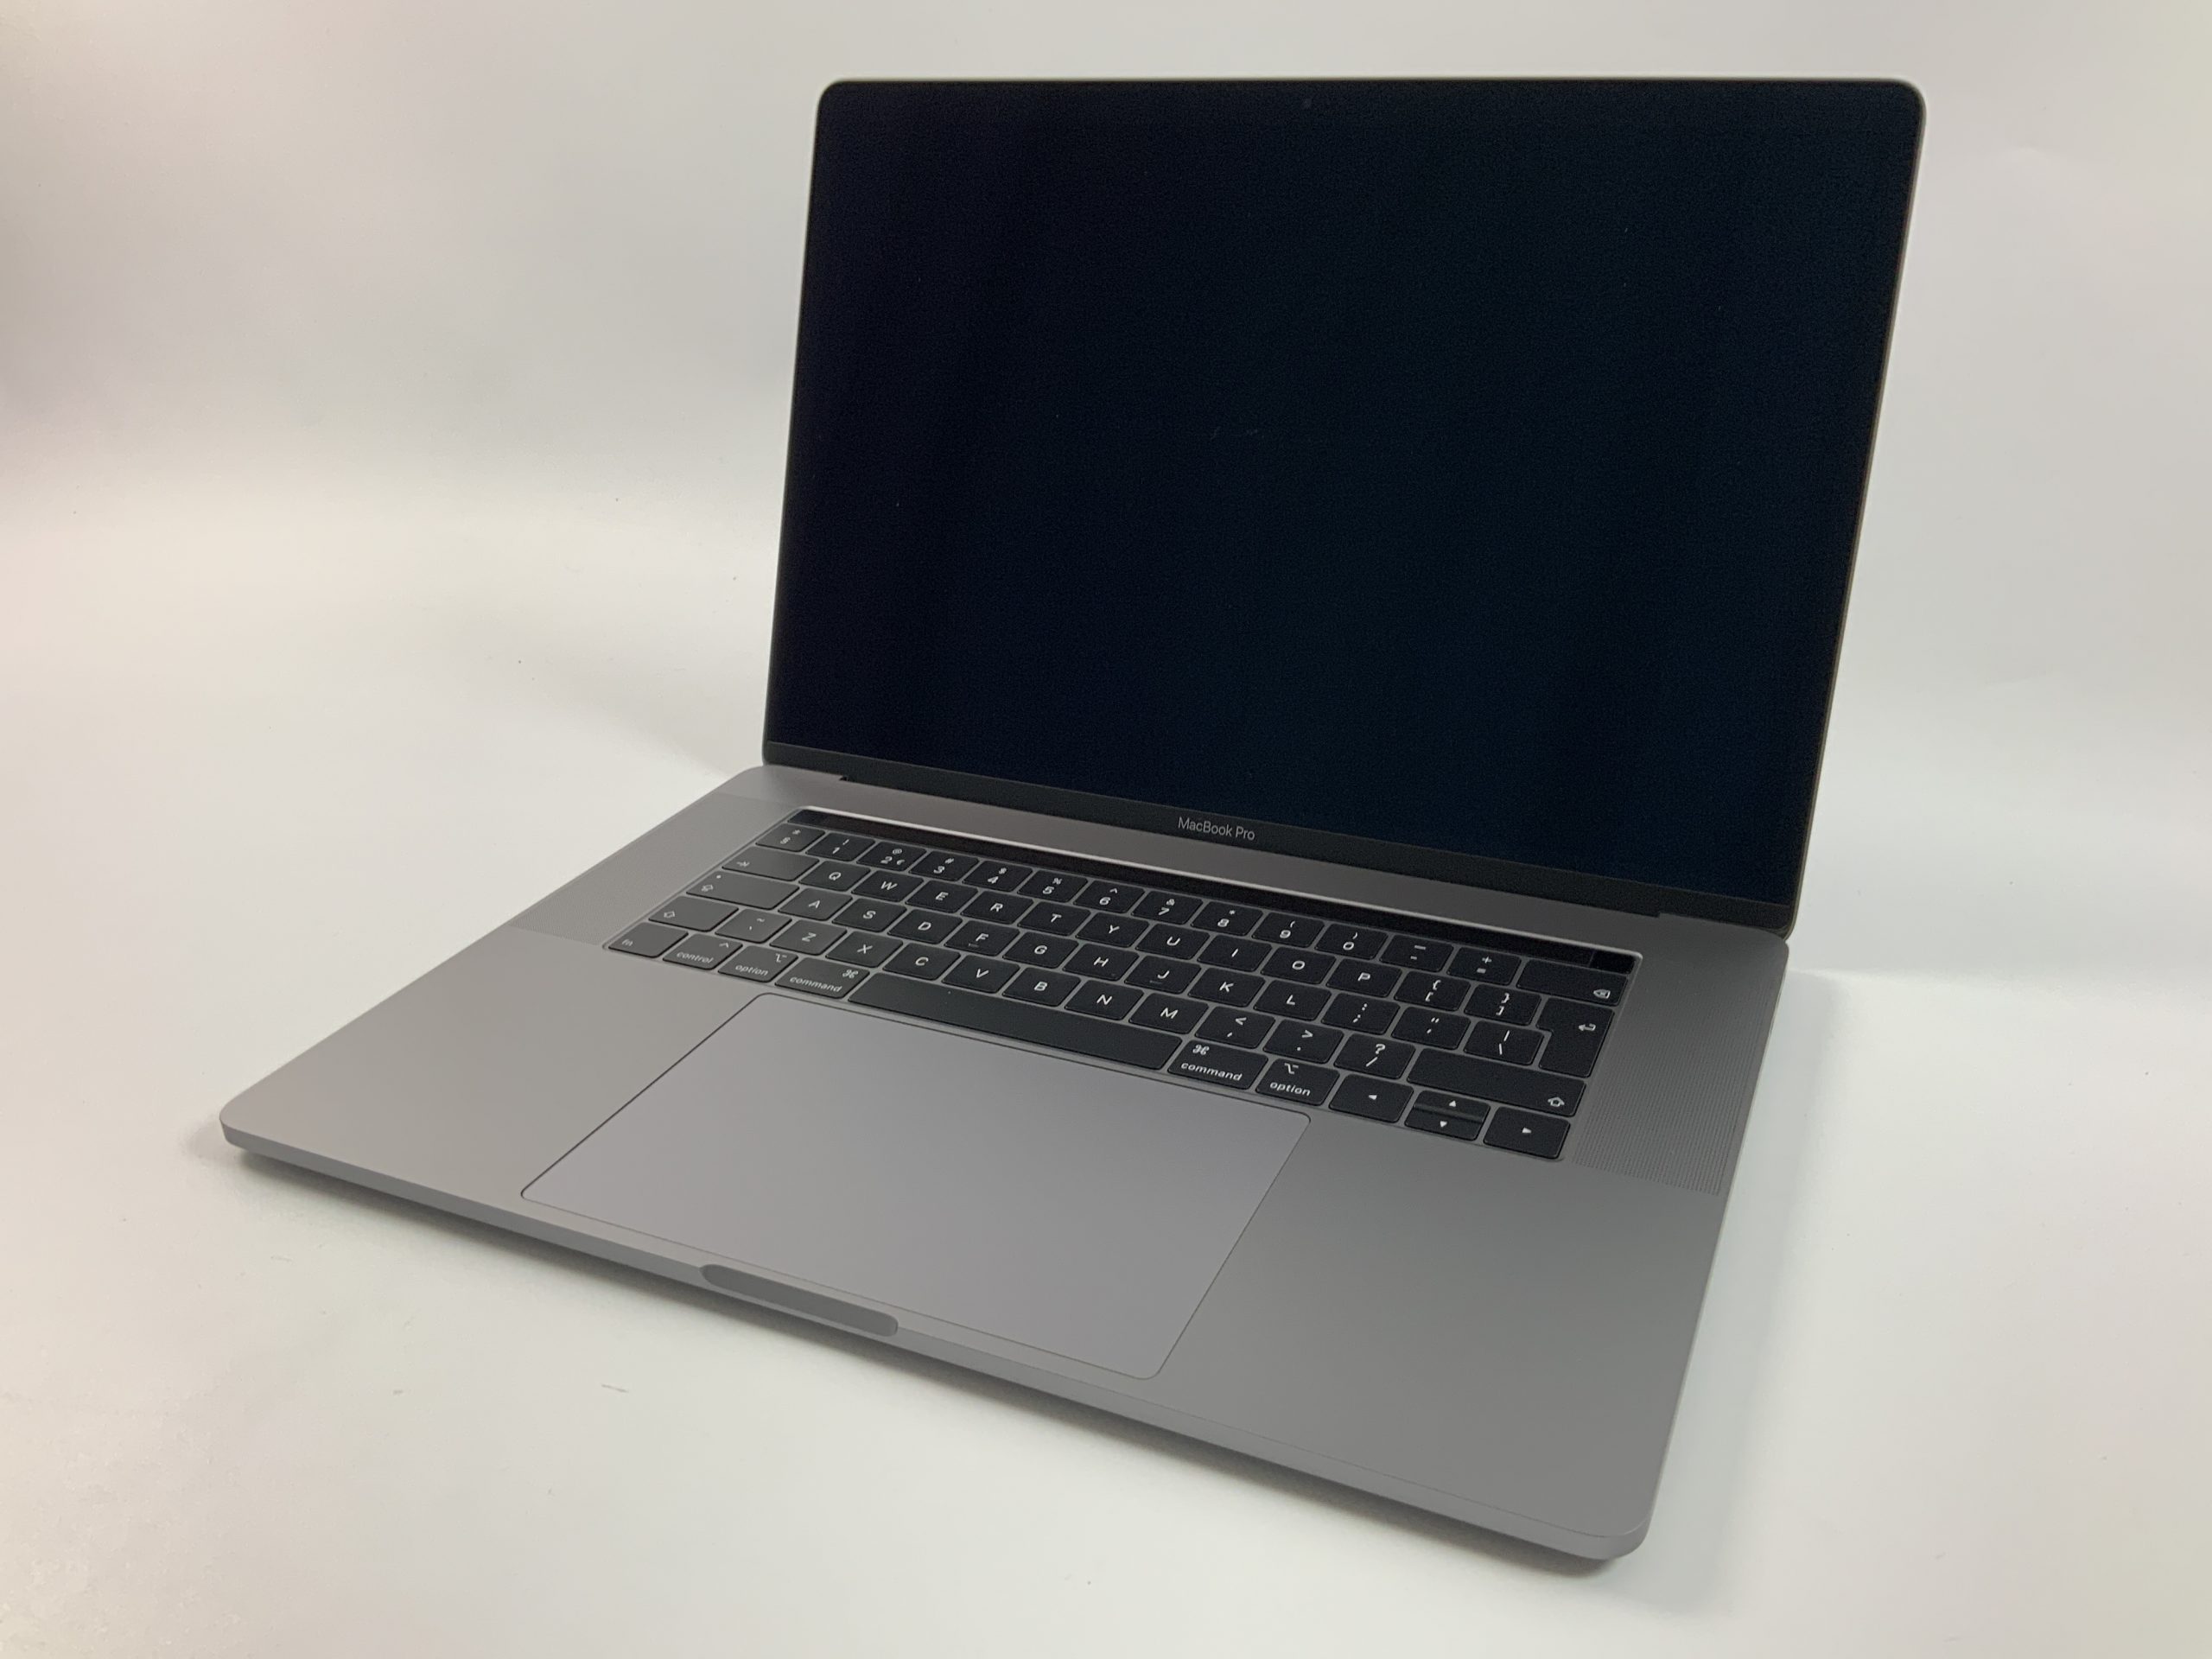 MacBook Pro 15" Touch Bar Mid 2018 (Intel 6-Core i7 2.6 GHz 16 GB RAM 512 GB SSD), Space Gray, Intel 6-Core i7 2.6 GHz, 16 GB RAM, 512 GB SSD, Afbeelding 1